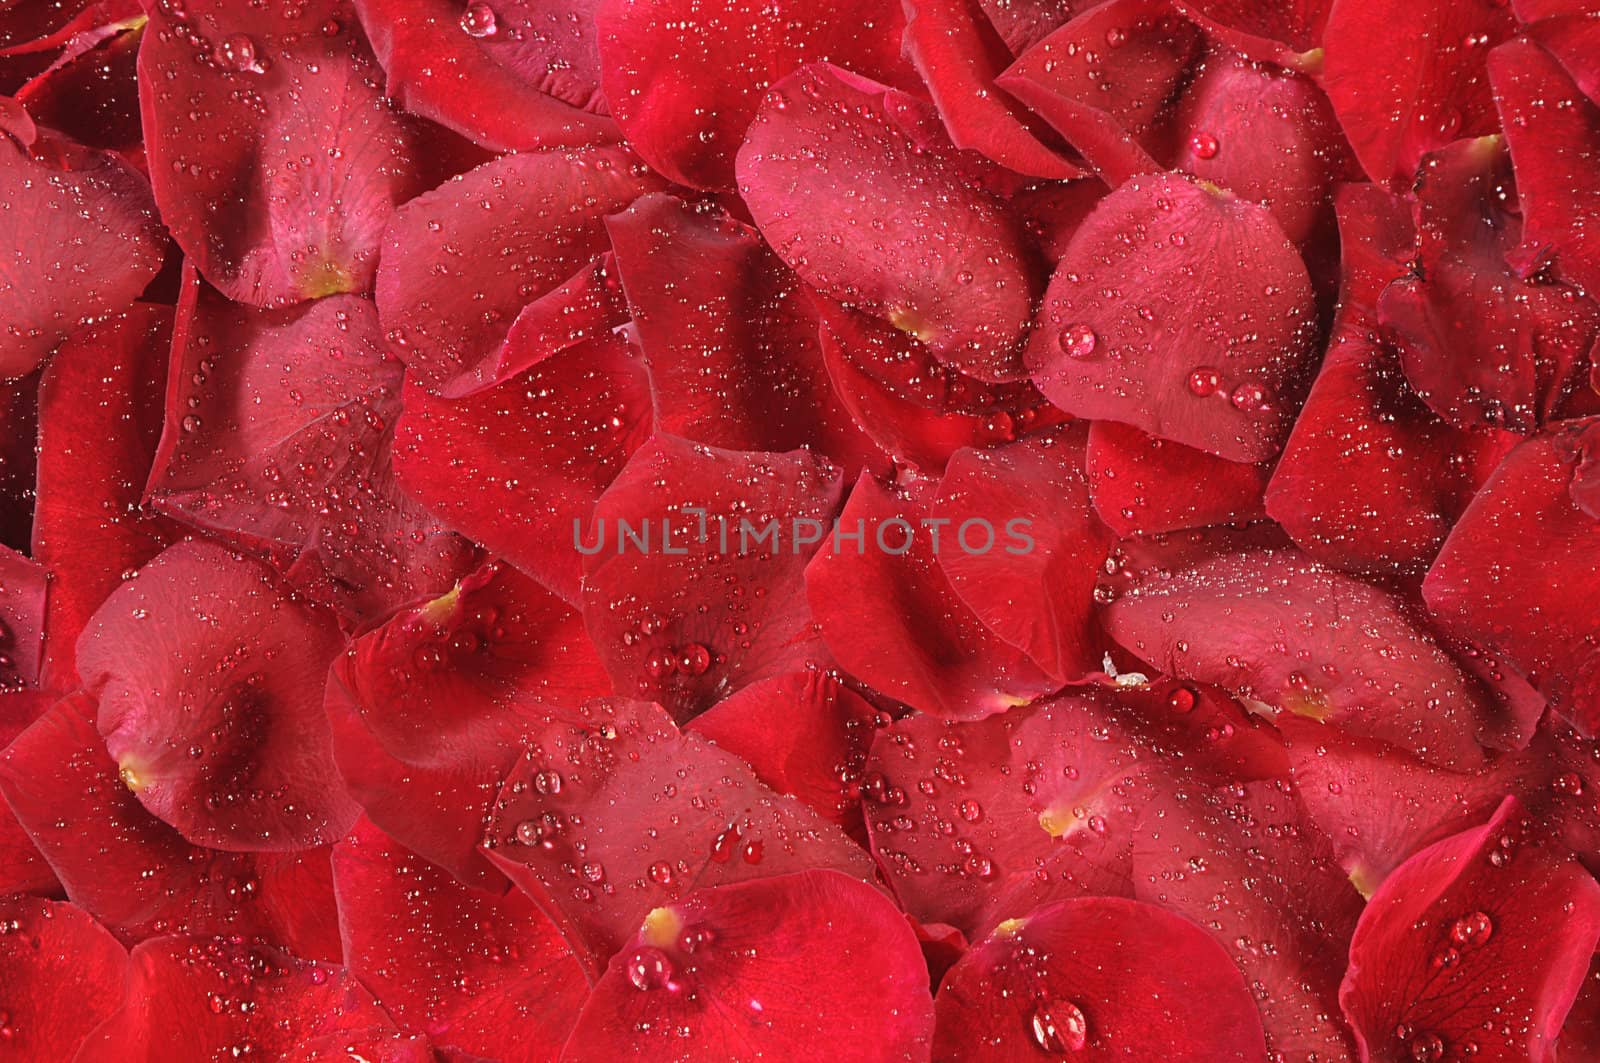 petals of roses are in drops of water as background